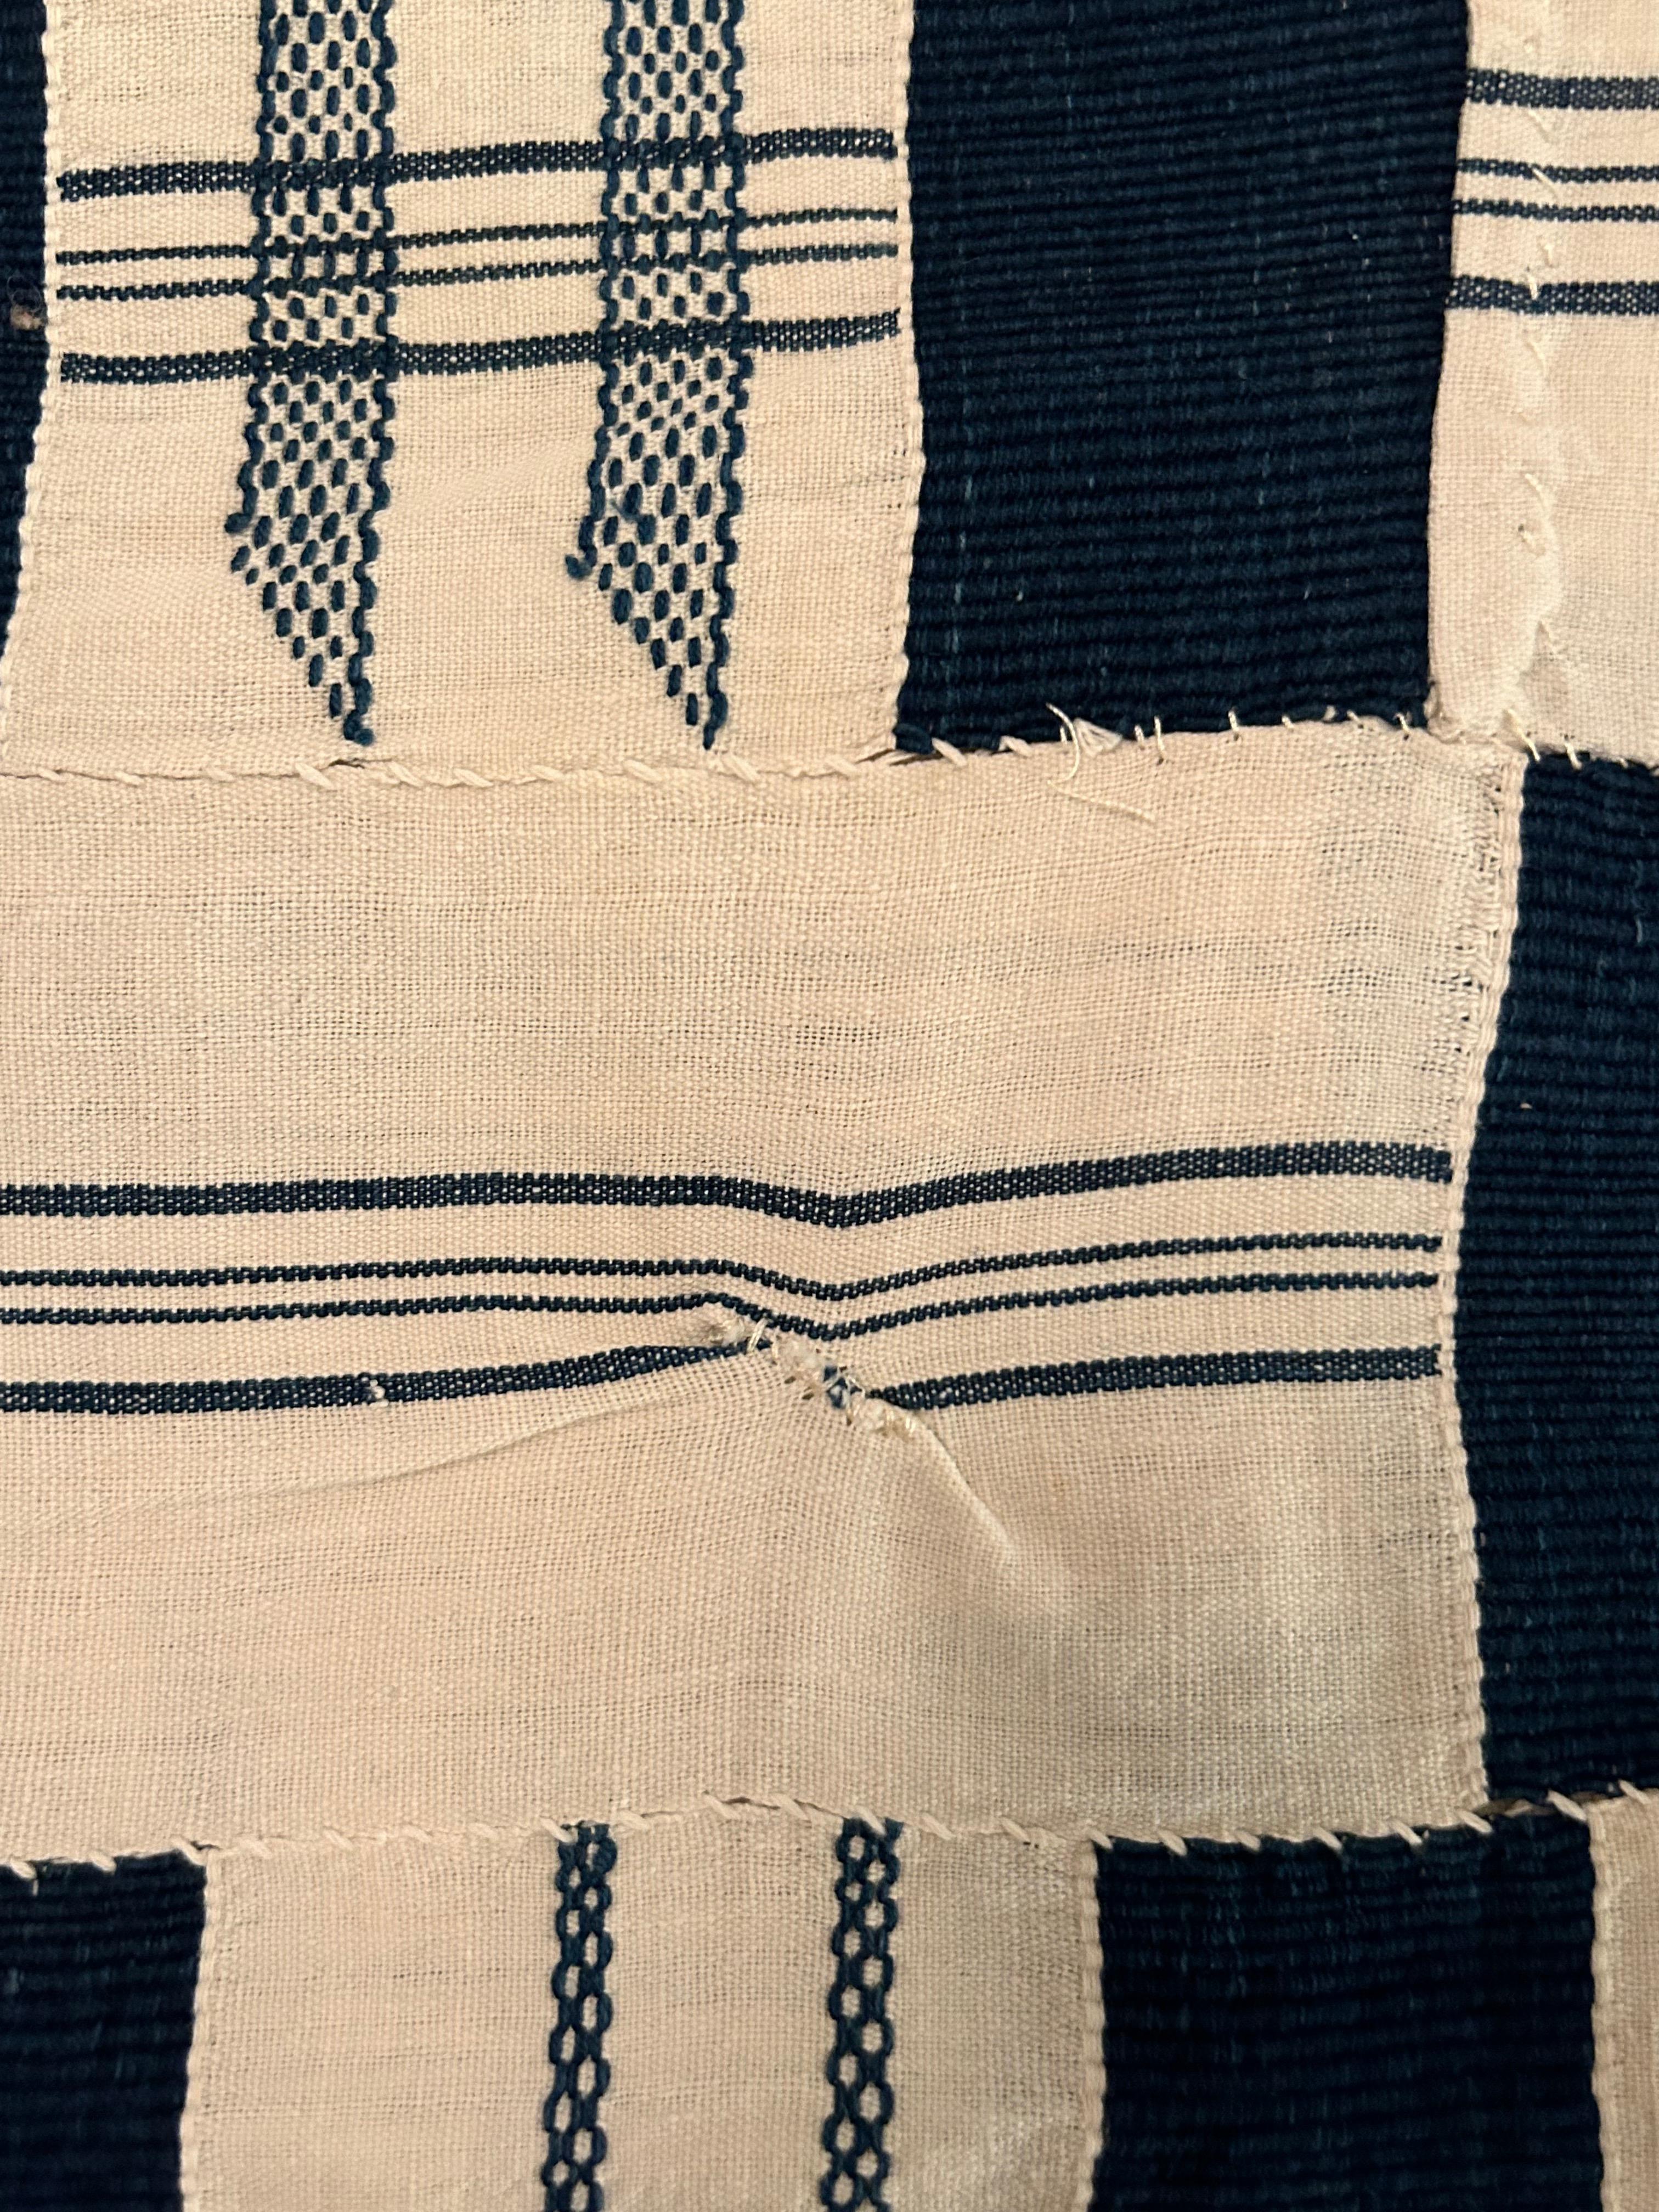 Vintage Asante Kente Textile in Blue and White, Ghana, 1930s 1